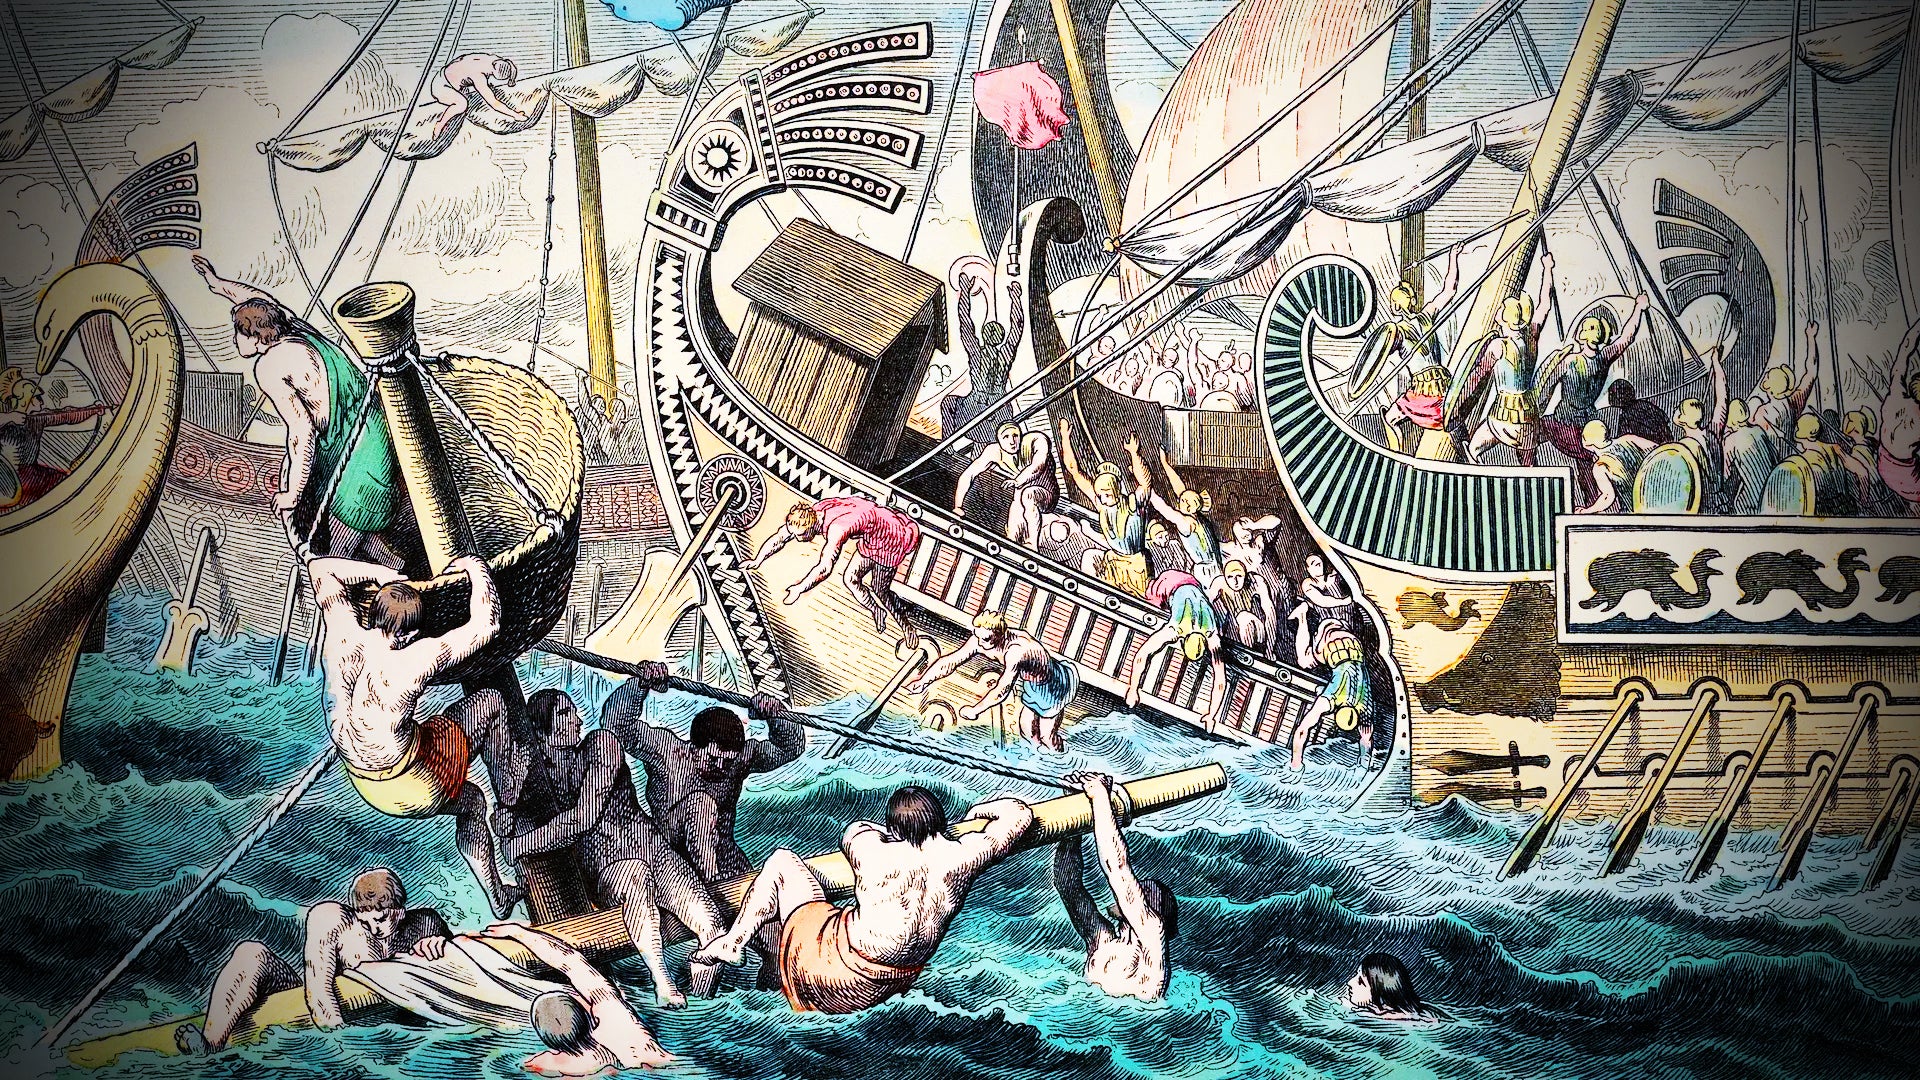 The tactics and tech behind naval warfare in the Ancient Greek period set the stage for thousands of years of naval warfare that followed.  War in anc